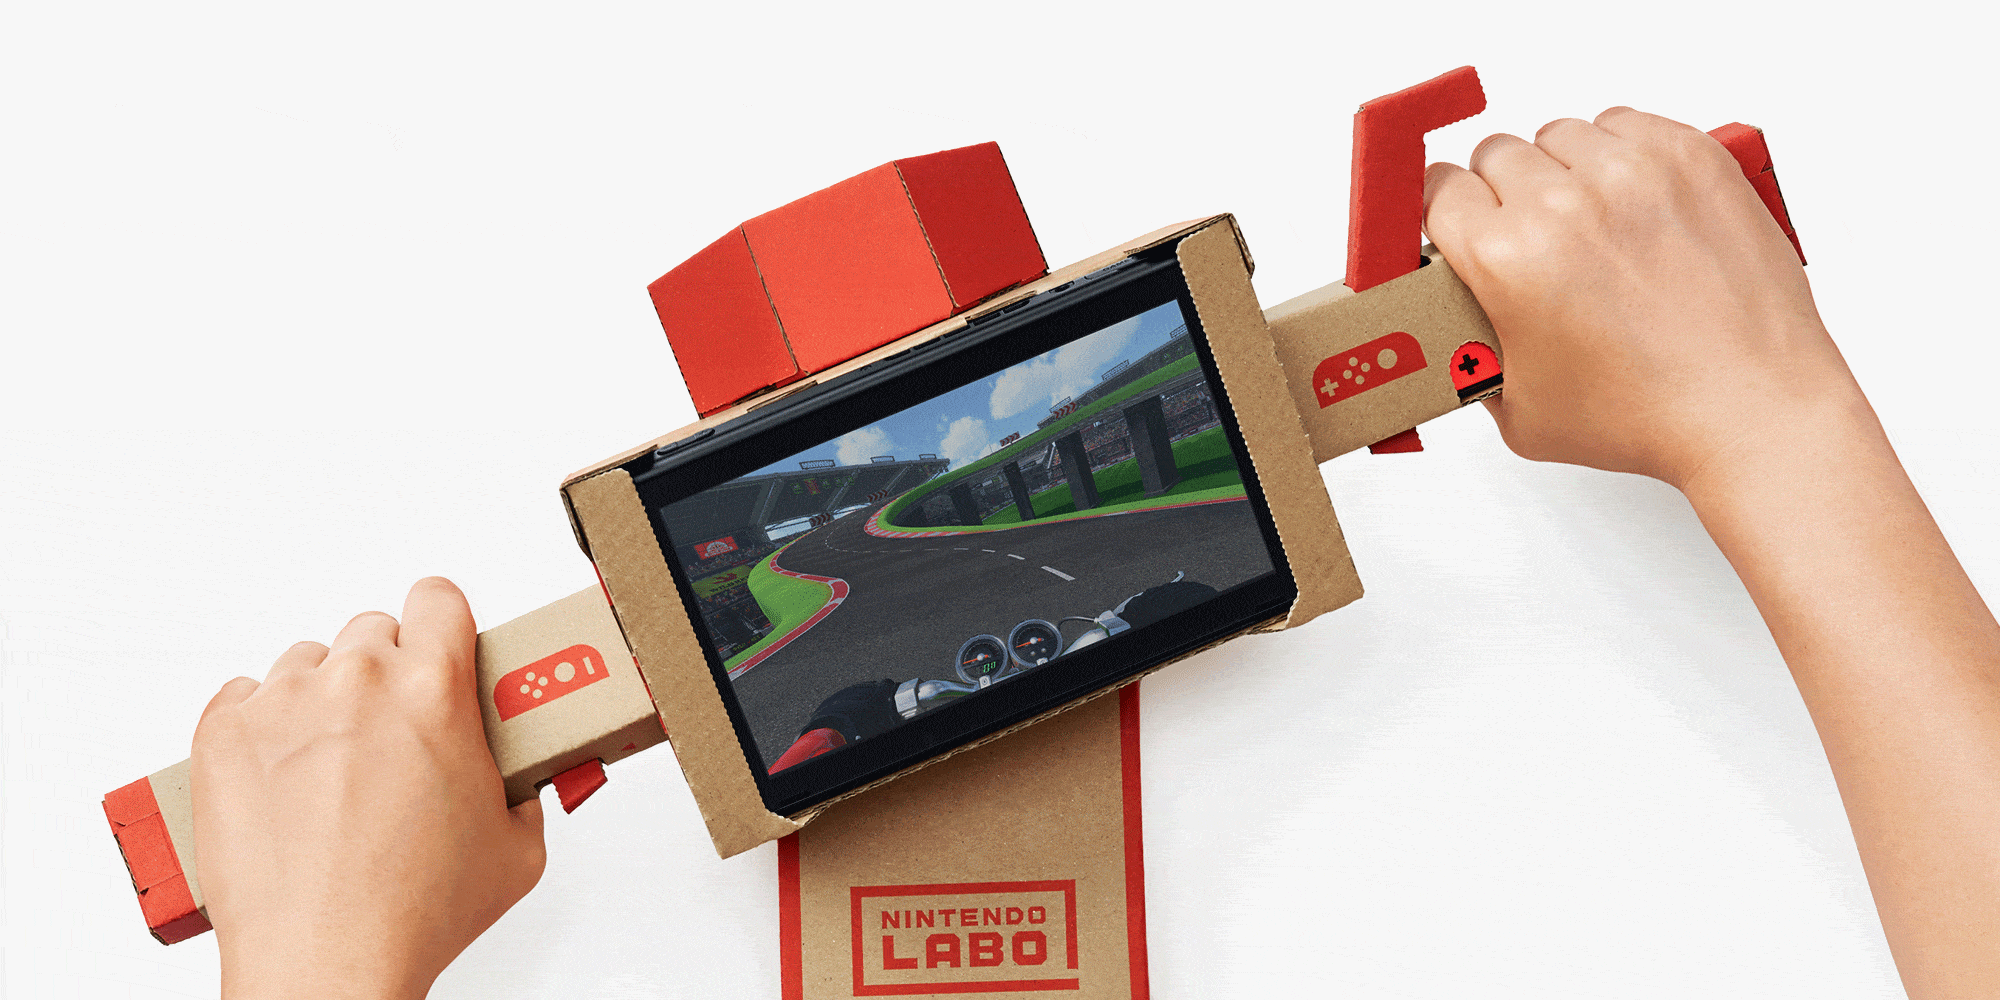 Nintendo Labo Review: the Robot & Variety Kits Worth the Hype?